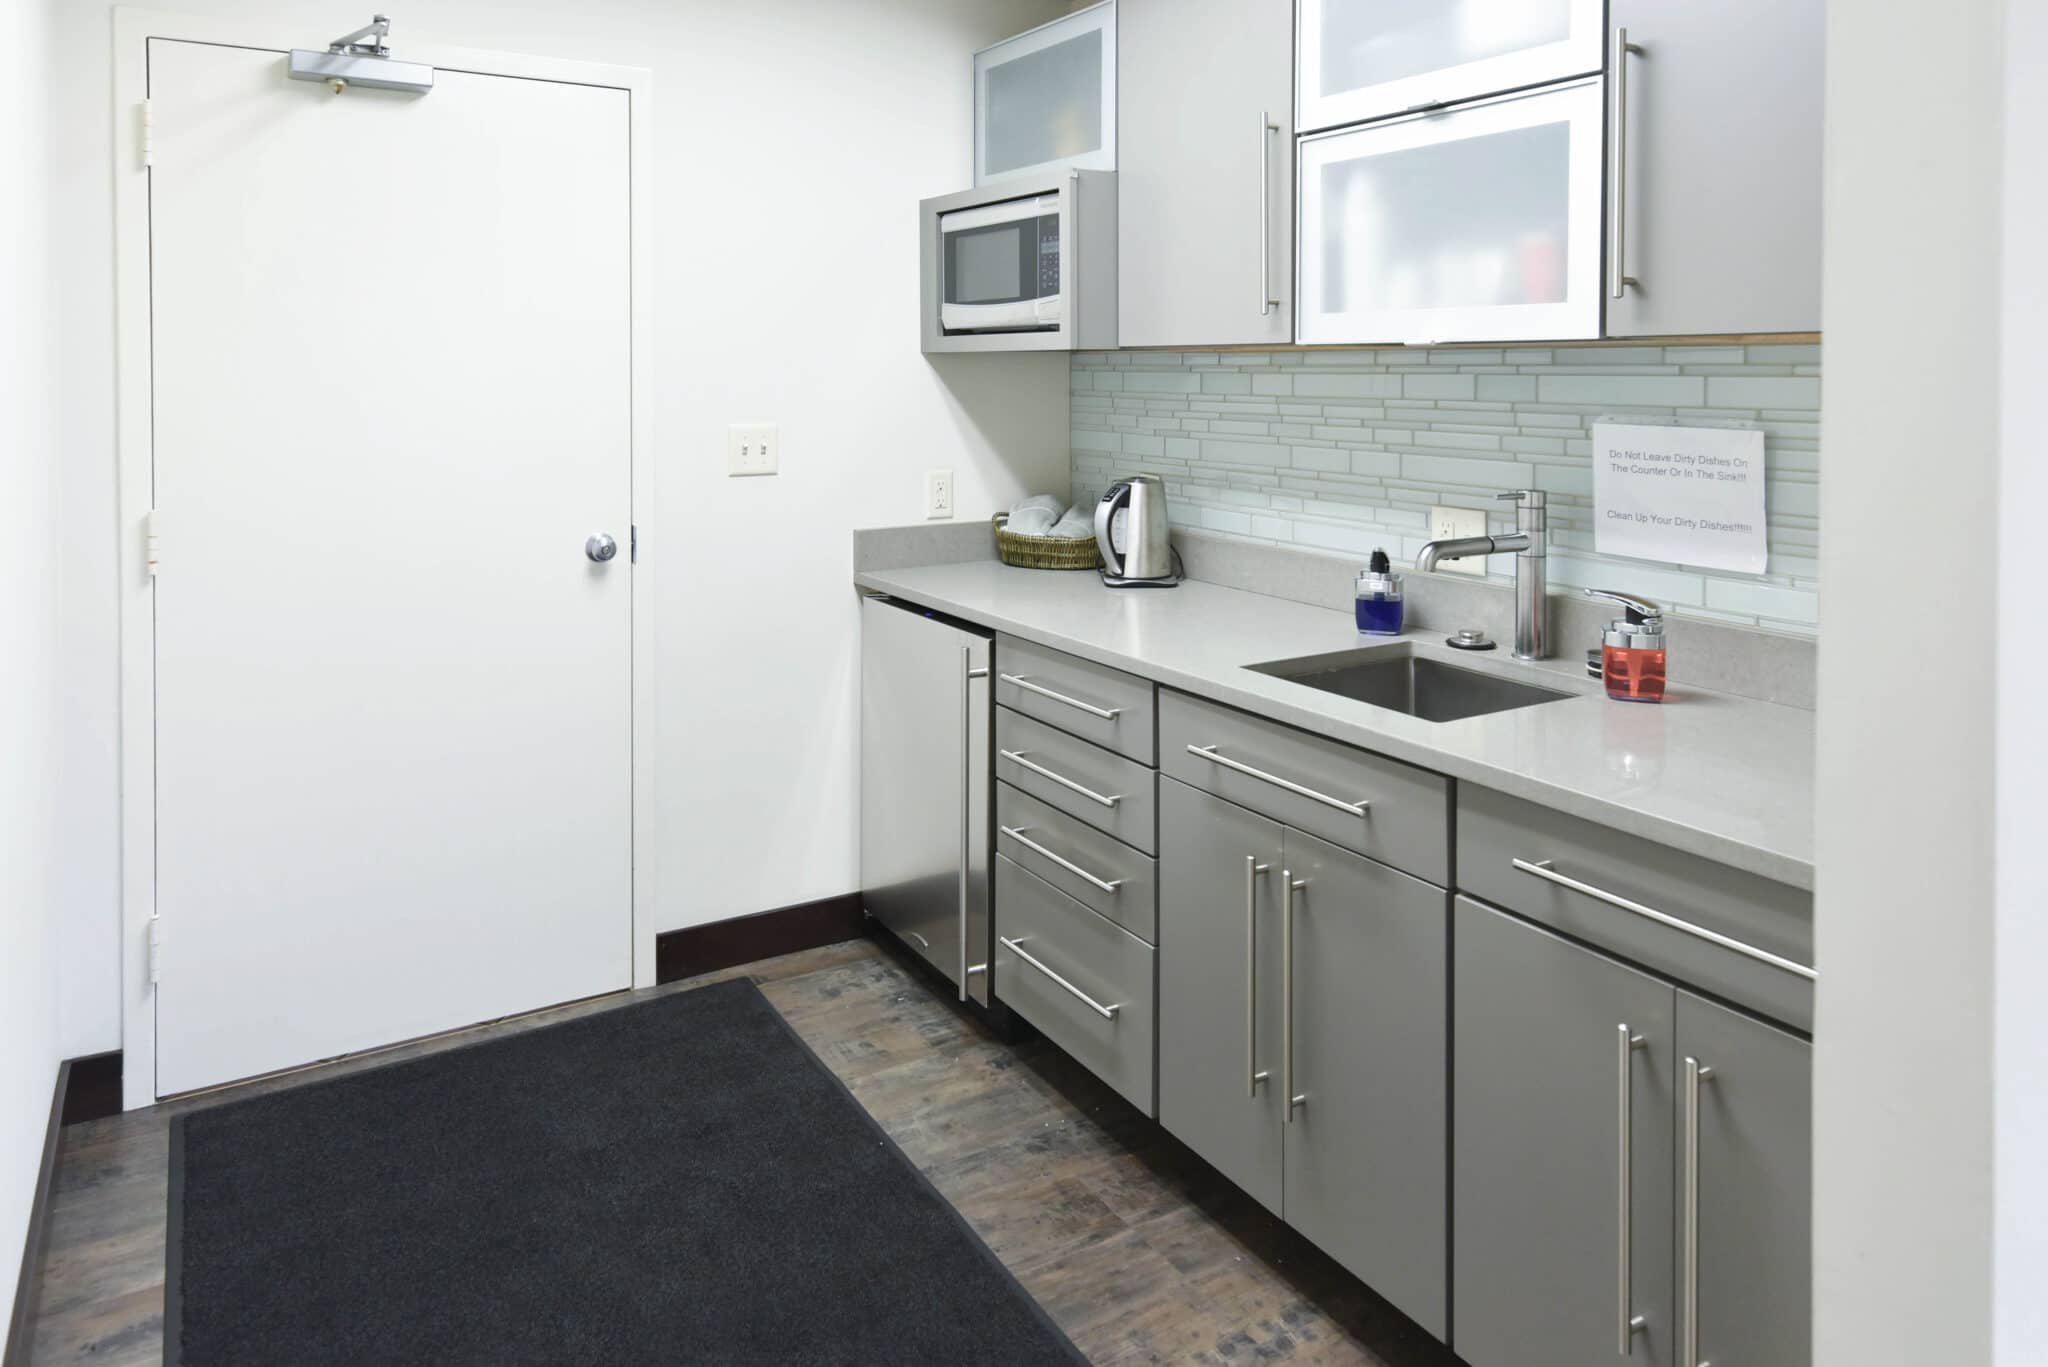 View of small clean office kitchenette